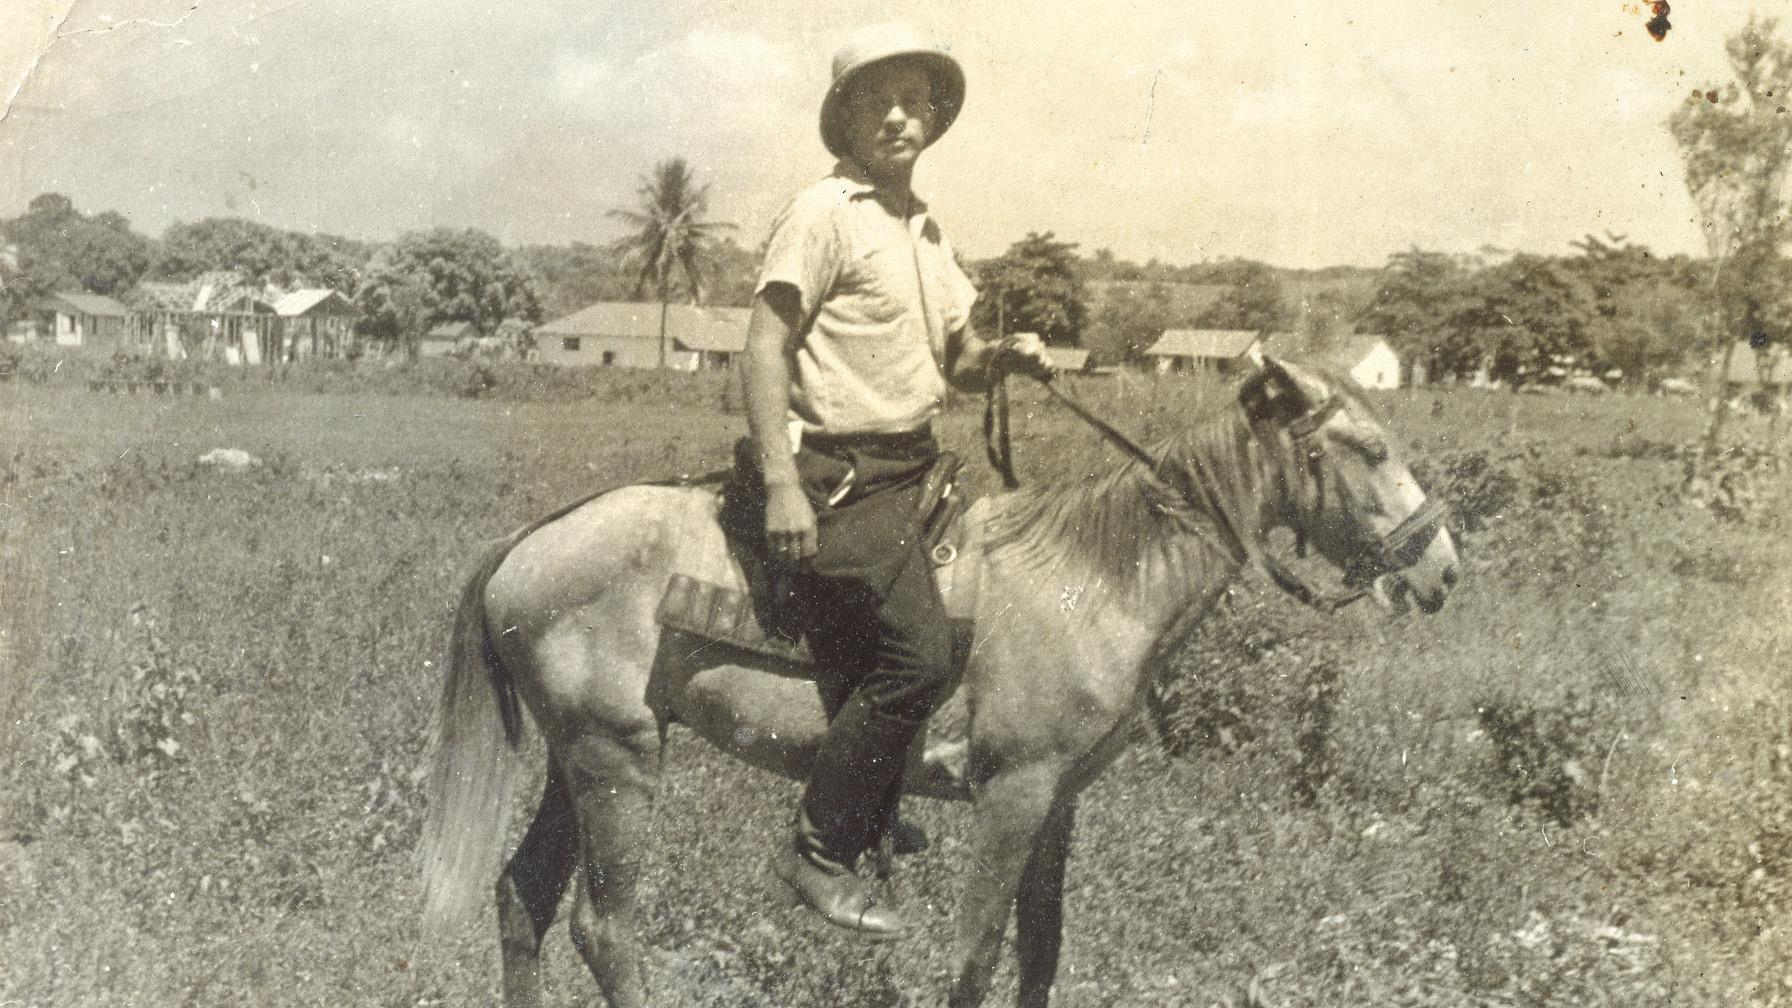 The Dominican Republic took in Jewish refugees fleeing Nazi Germany in exchange for a promise to develop the land. Franz Blumenstein rides a donkey in Sosúa, Dominican Republic, 1940. 